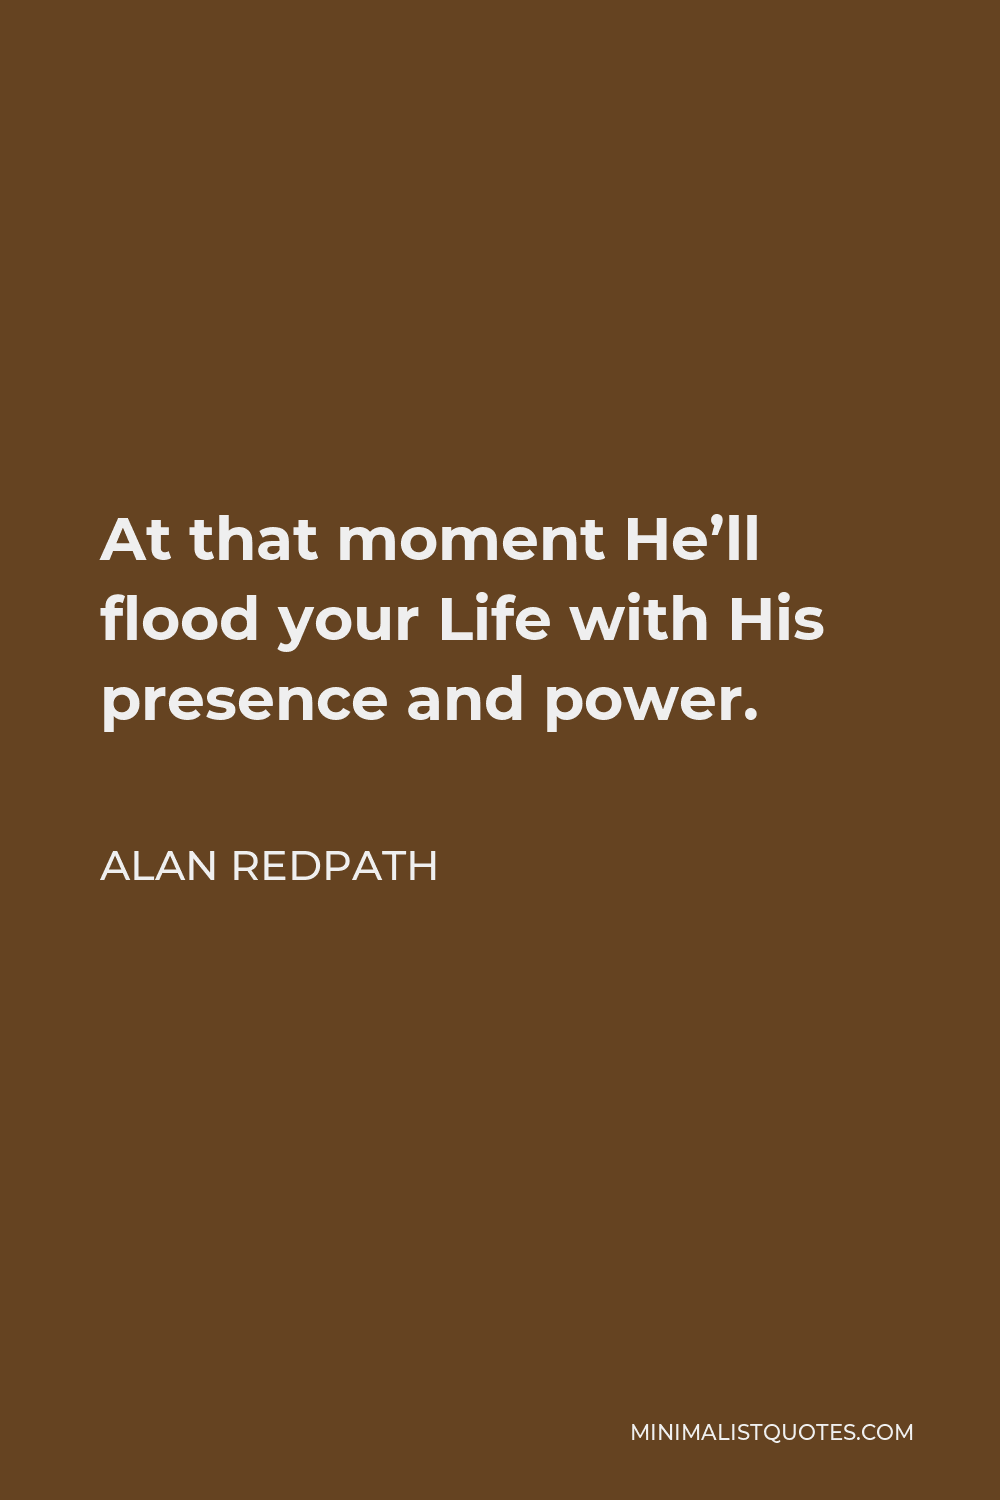 Alan Redpath Quote - At that moment He’ll flood your Life with His presence and power.